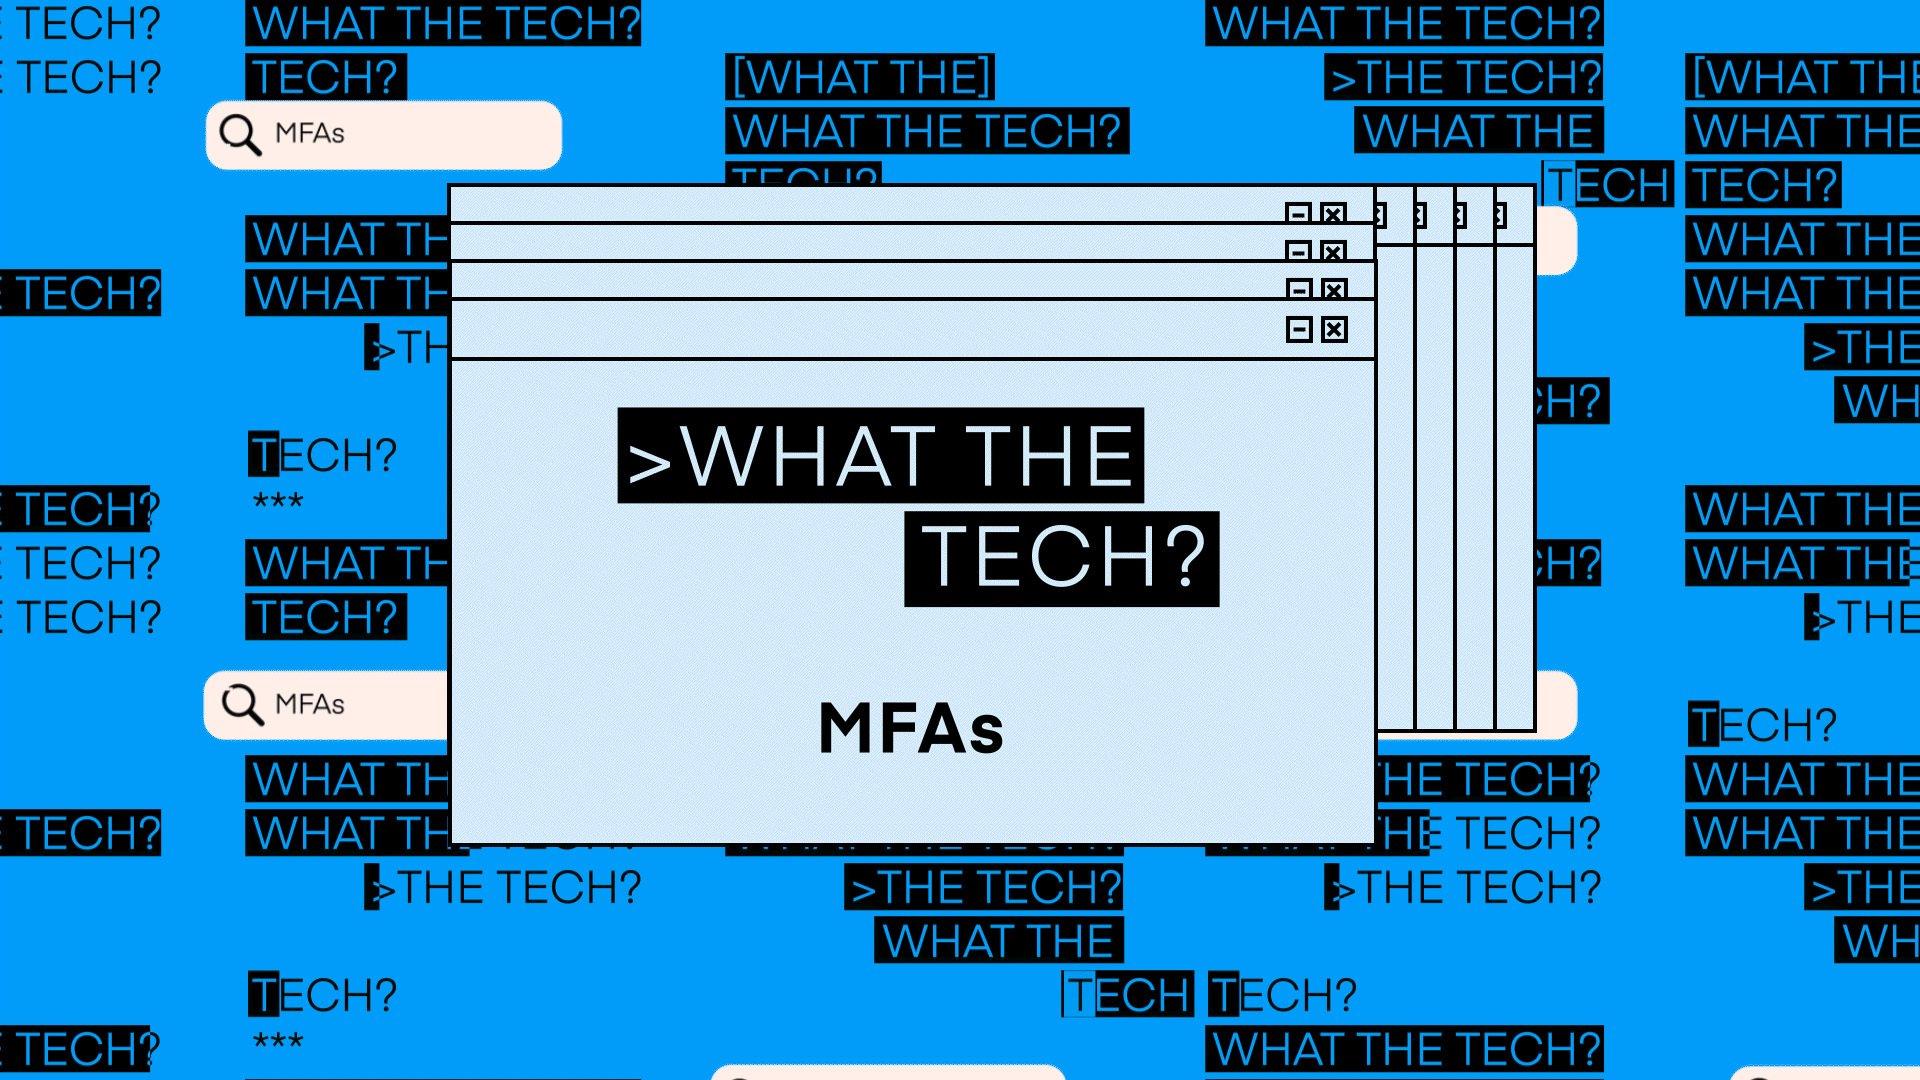 What the tech are MFAs?